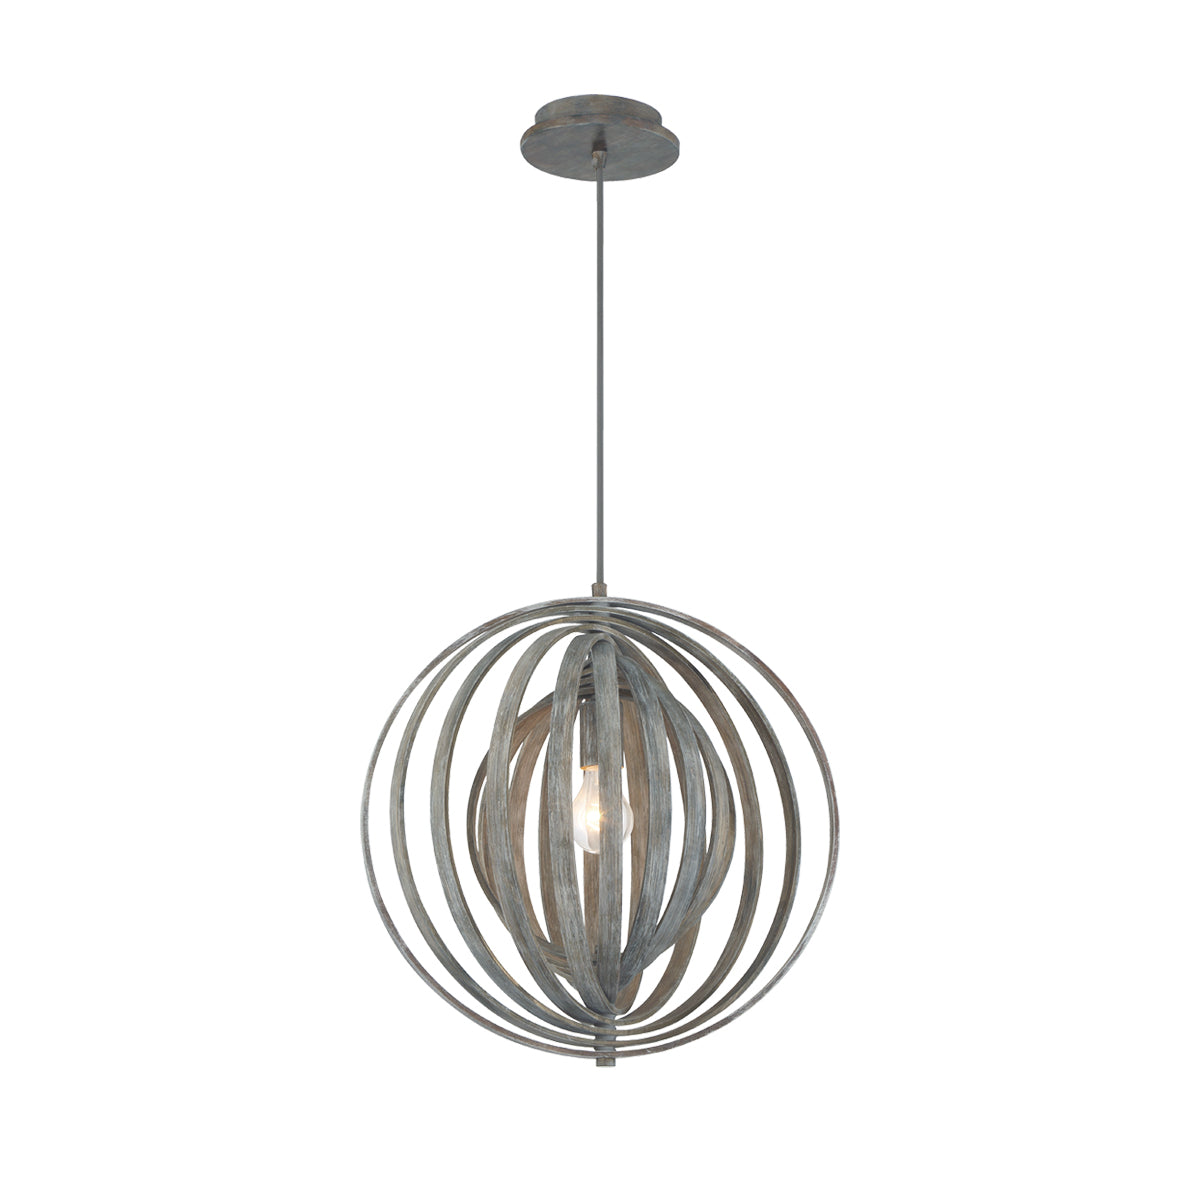 Eurofase Lighting Abruzzo 17" Small Round Dimmable Incandescent Weathered Gray Pendant Light With Retractable Rings Shade